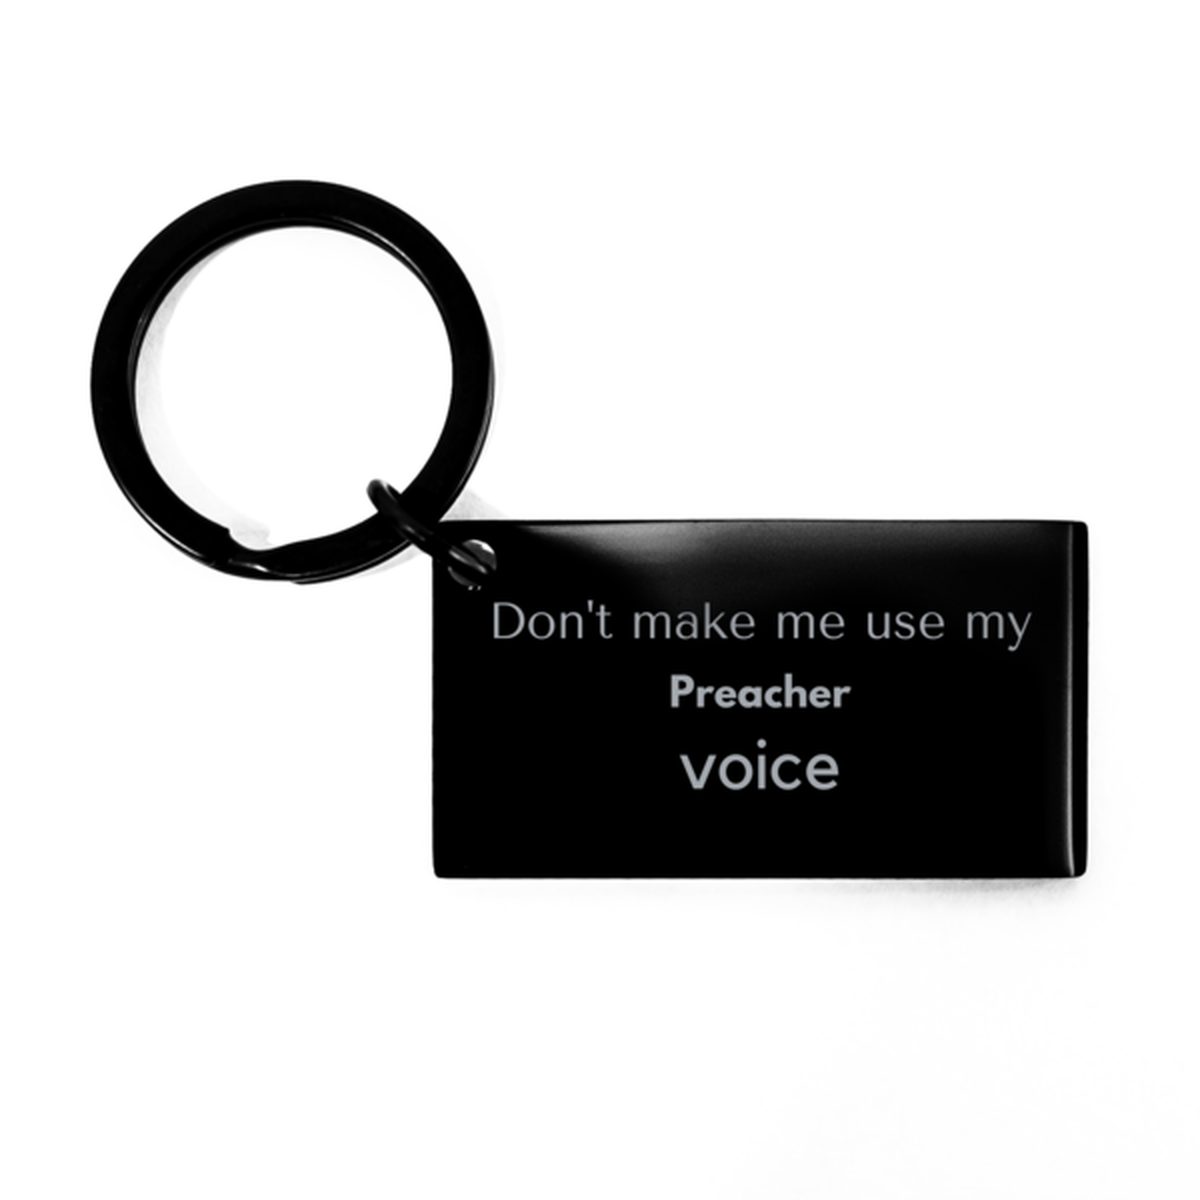 Don't make me use my Preacher voice, Sarcasm Preacher Gifts, Christmas Preacher Keychain Birthday Unique Gifts For Preacher Coworkers, Men, Women, Colleague, Friends